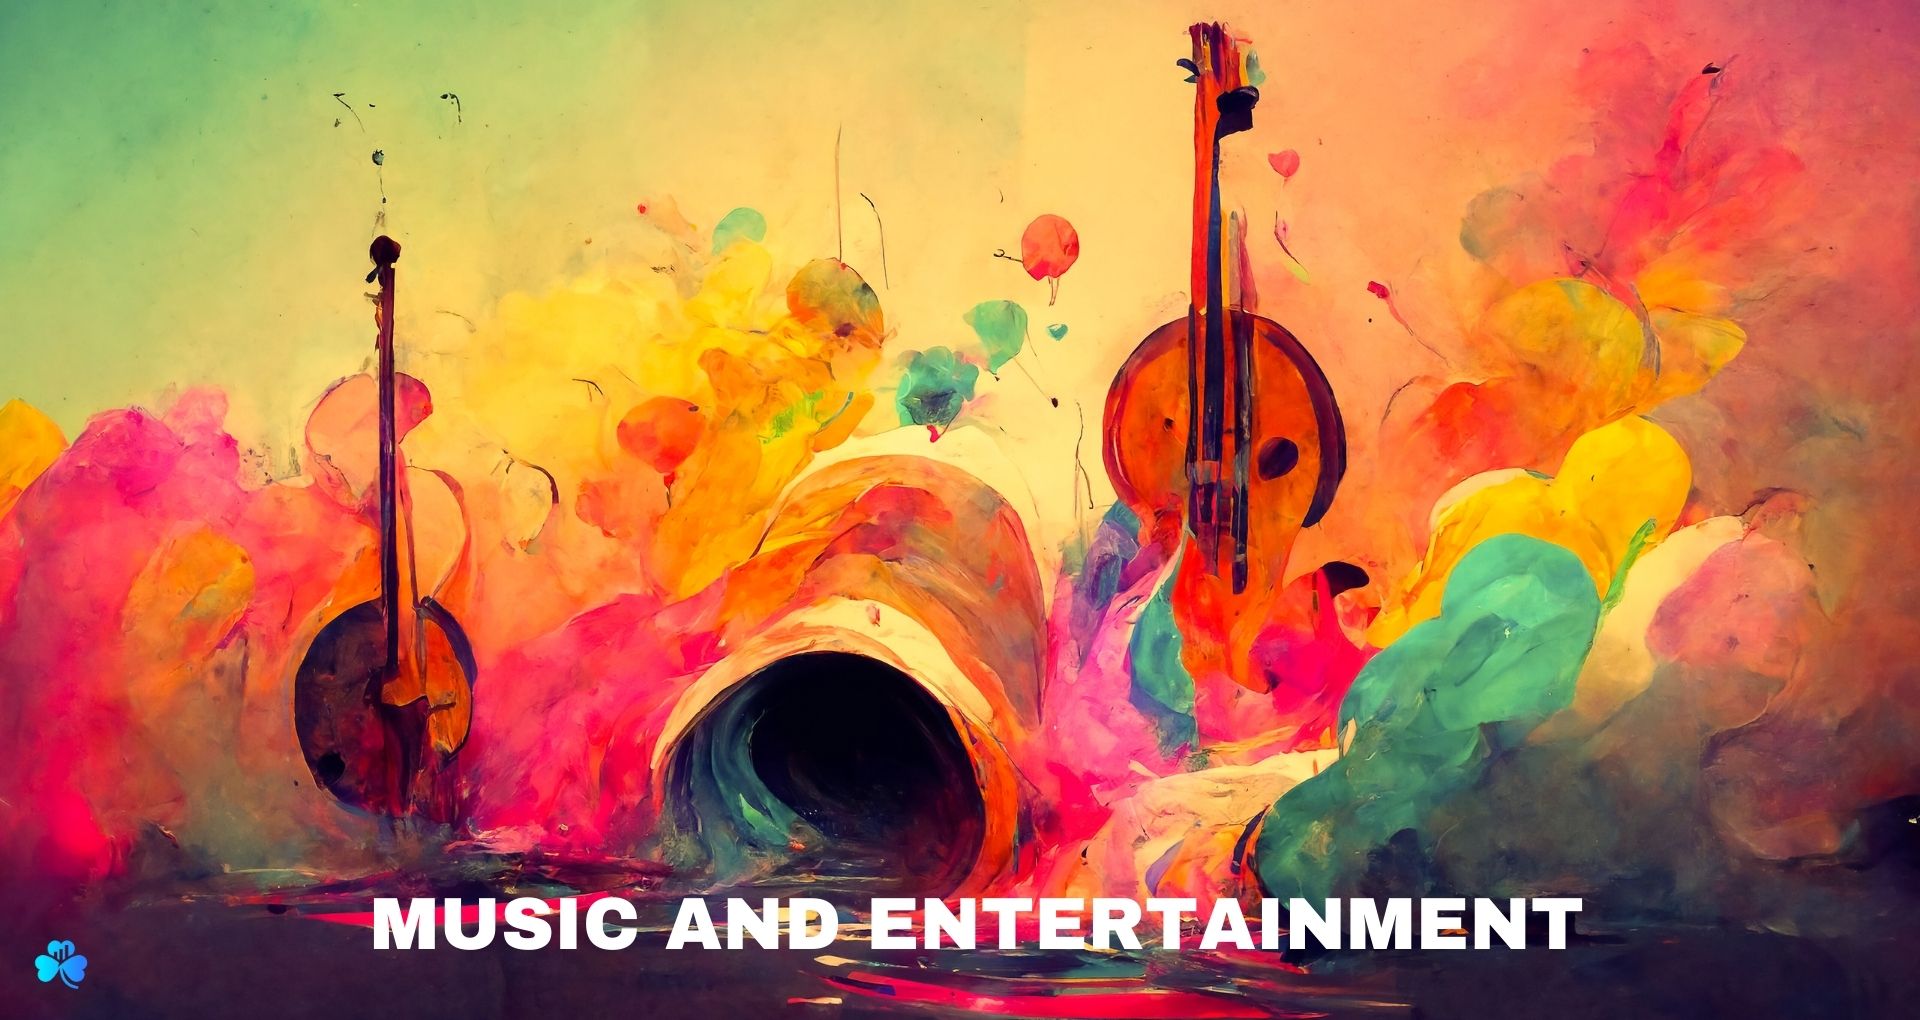 Music and entertainment